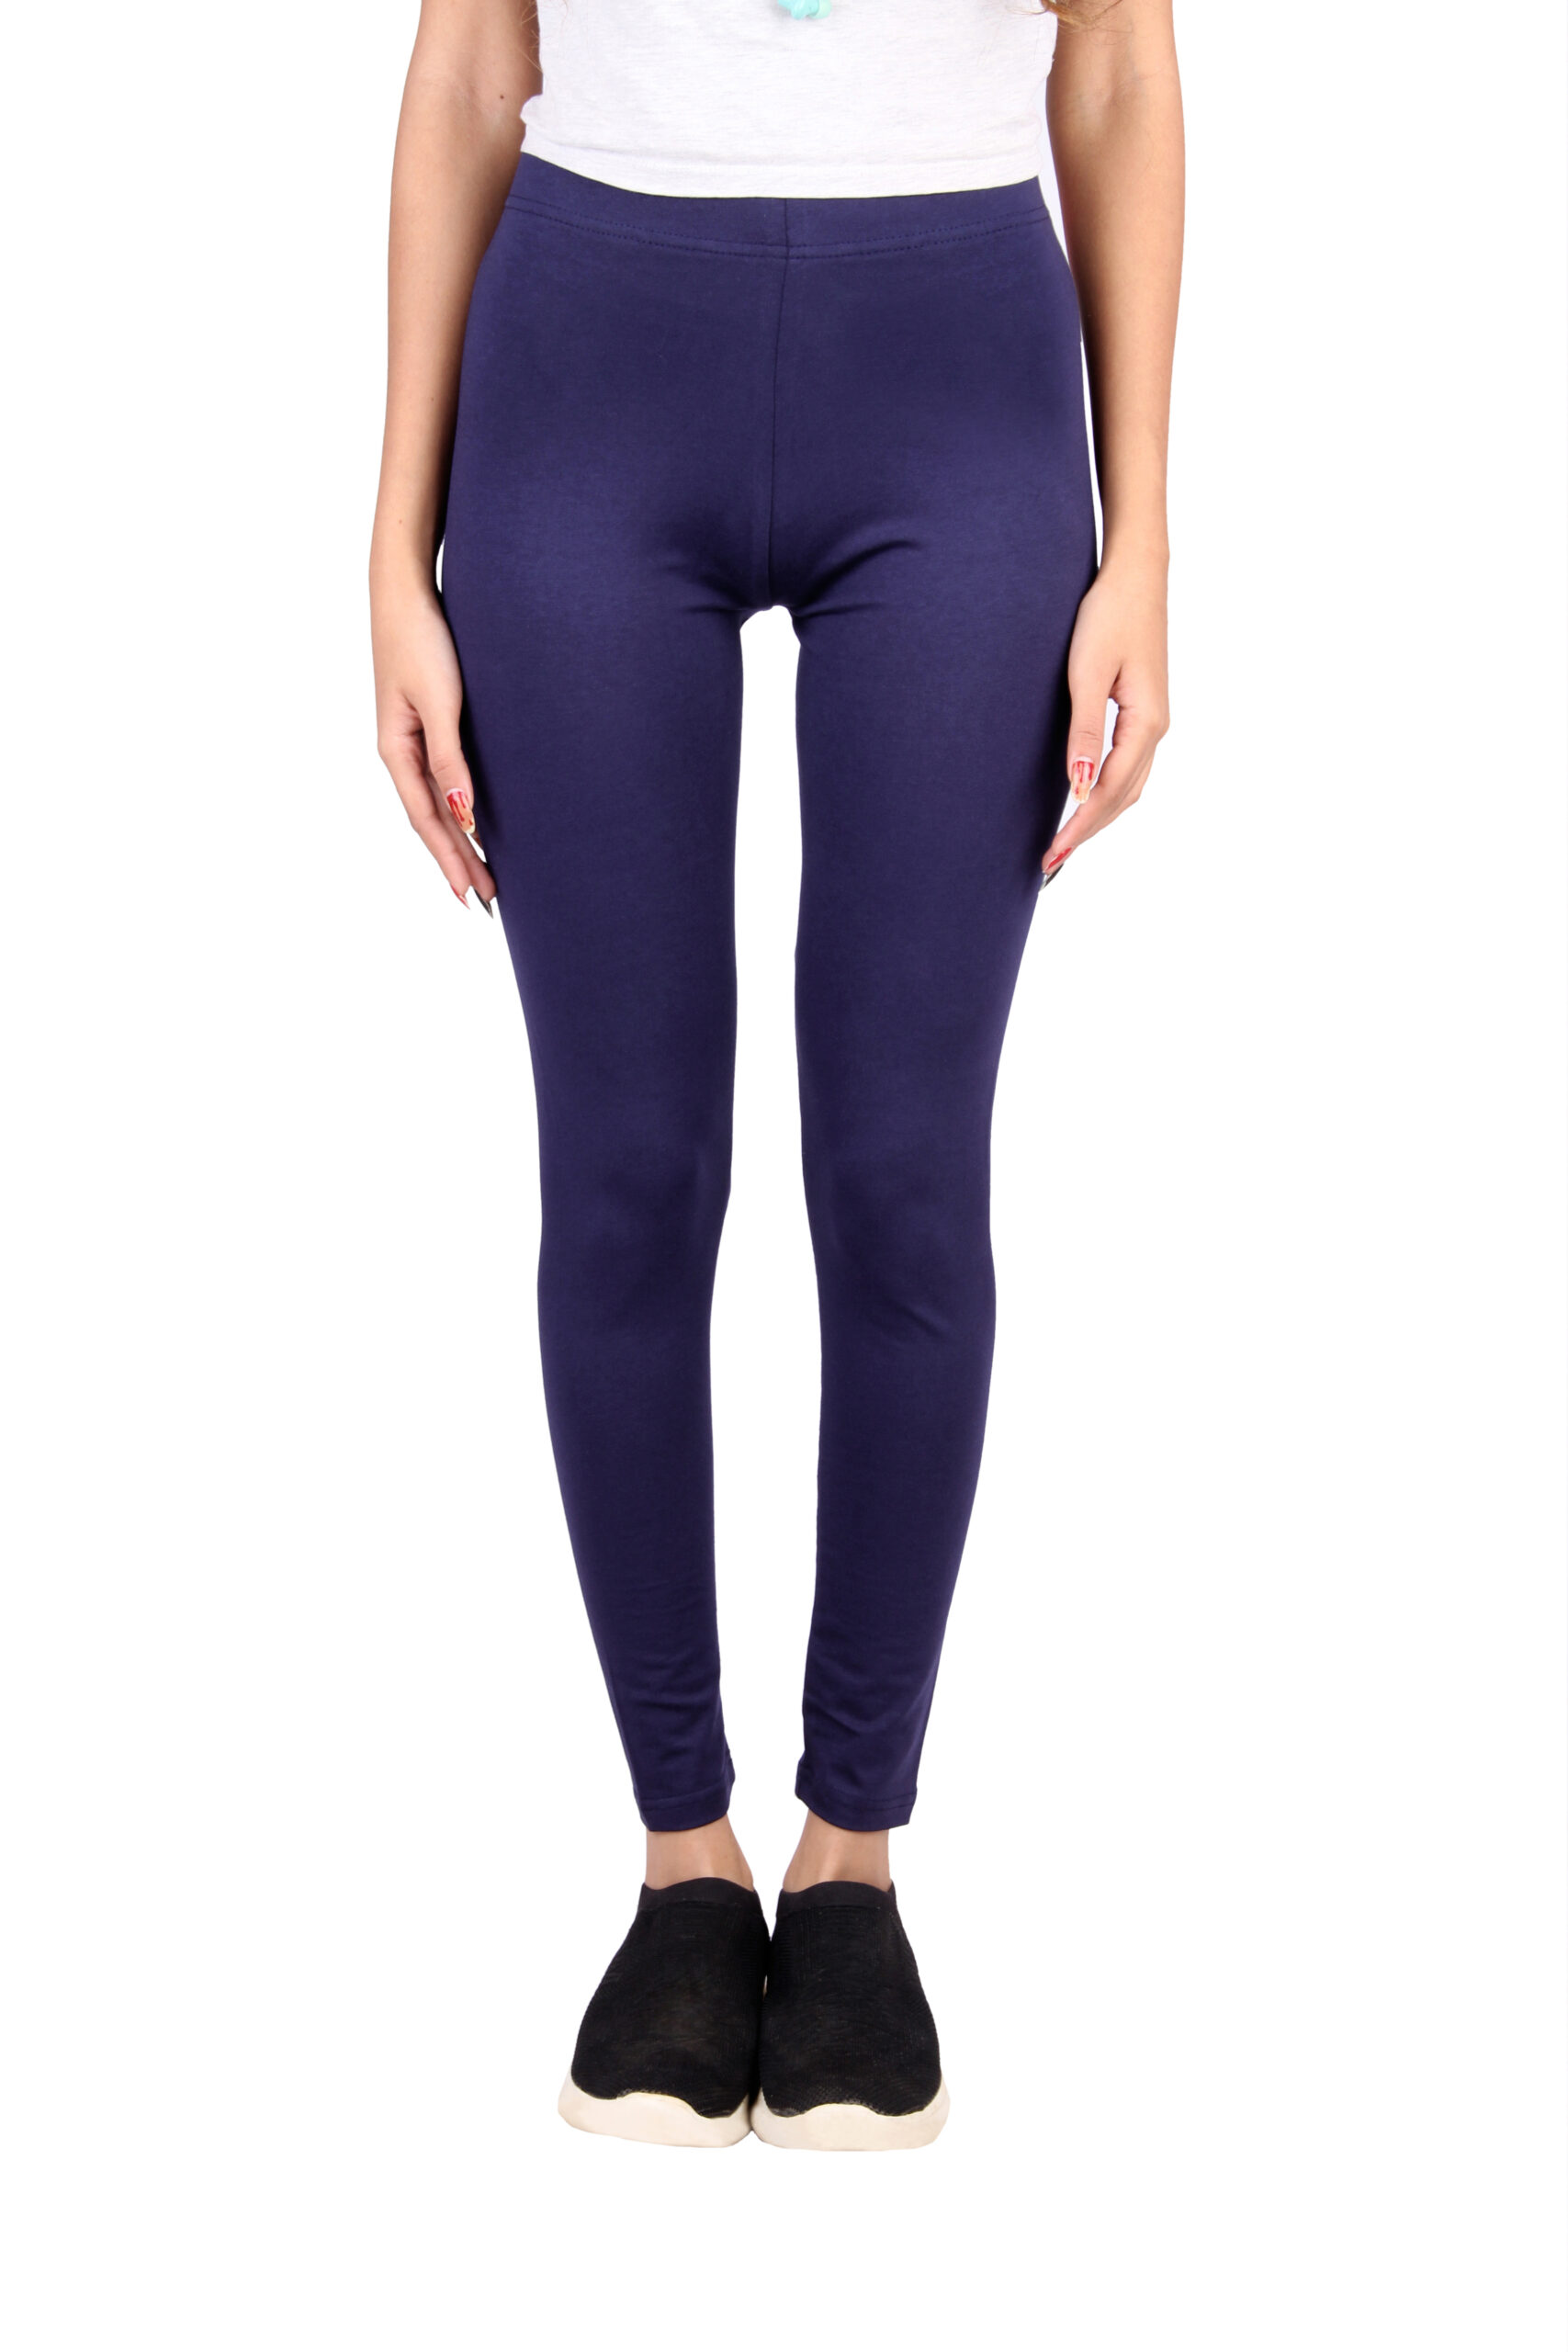 rating 4 leggings from 4 different brands~ | Gallery posted by c | Lemon8